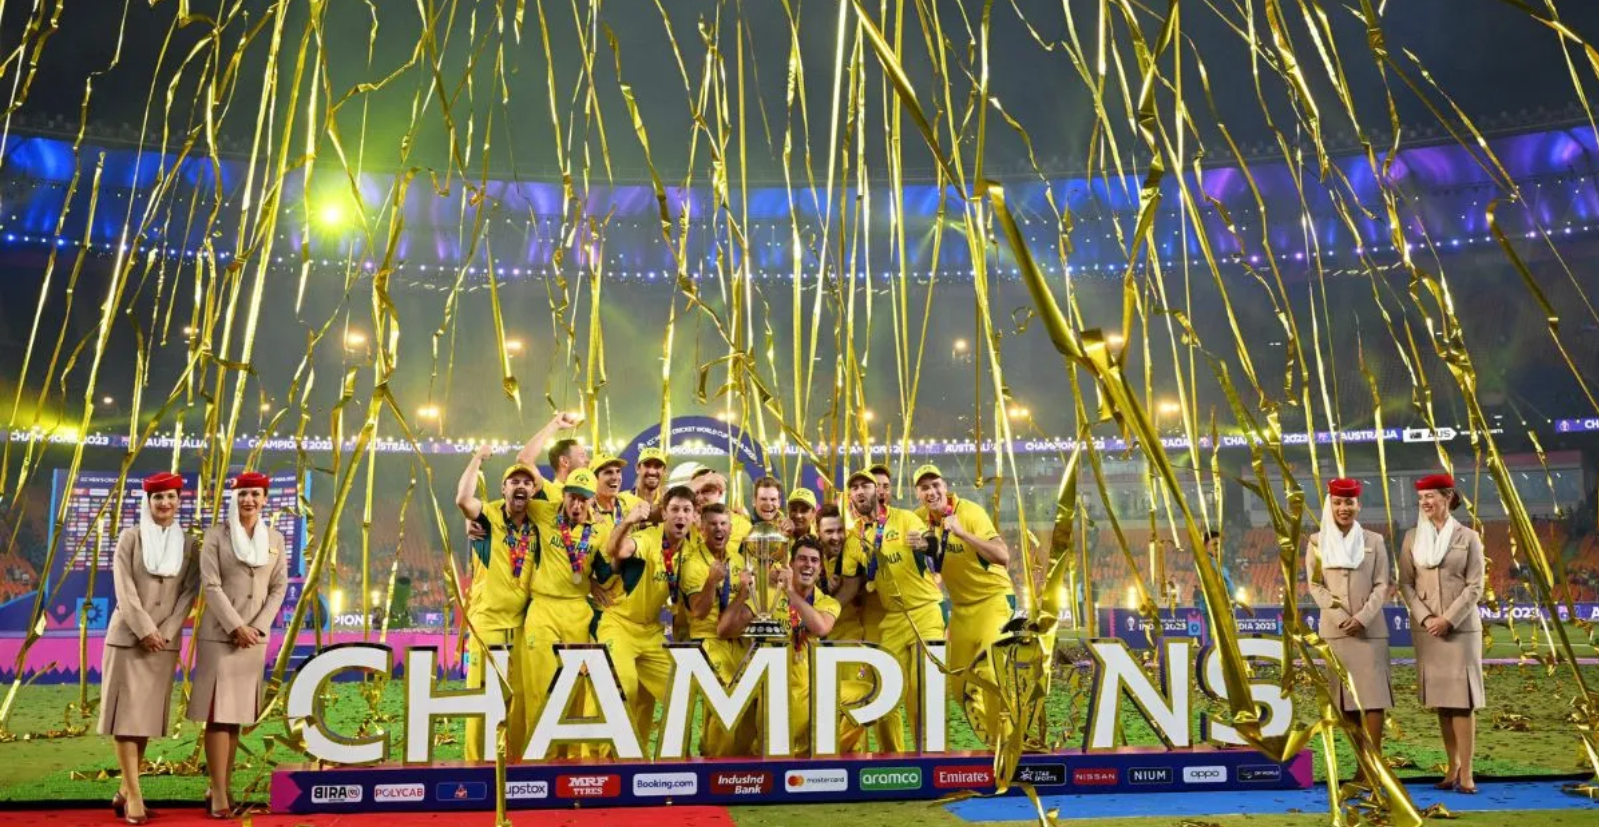 Hotstar Sets New Viewership Milestone with 5.9 Crore Viewers in IND vs AUS ICC World Cup Final